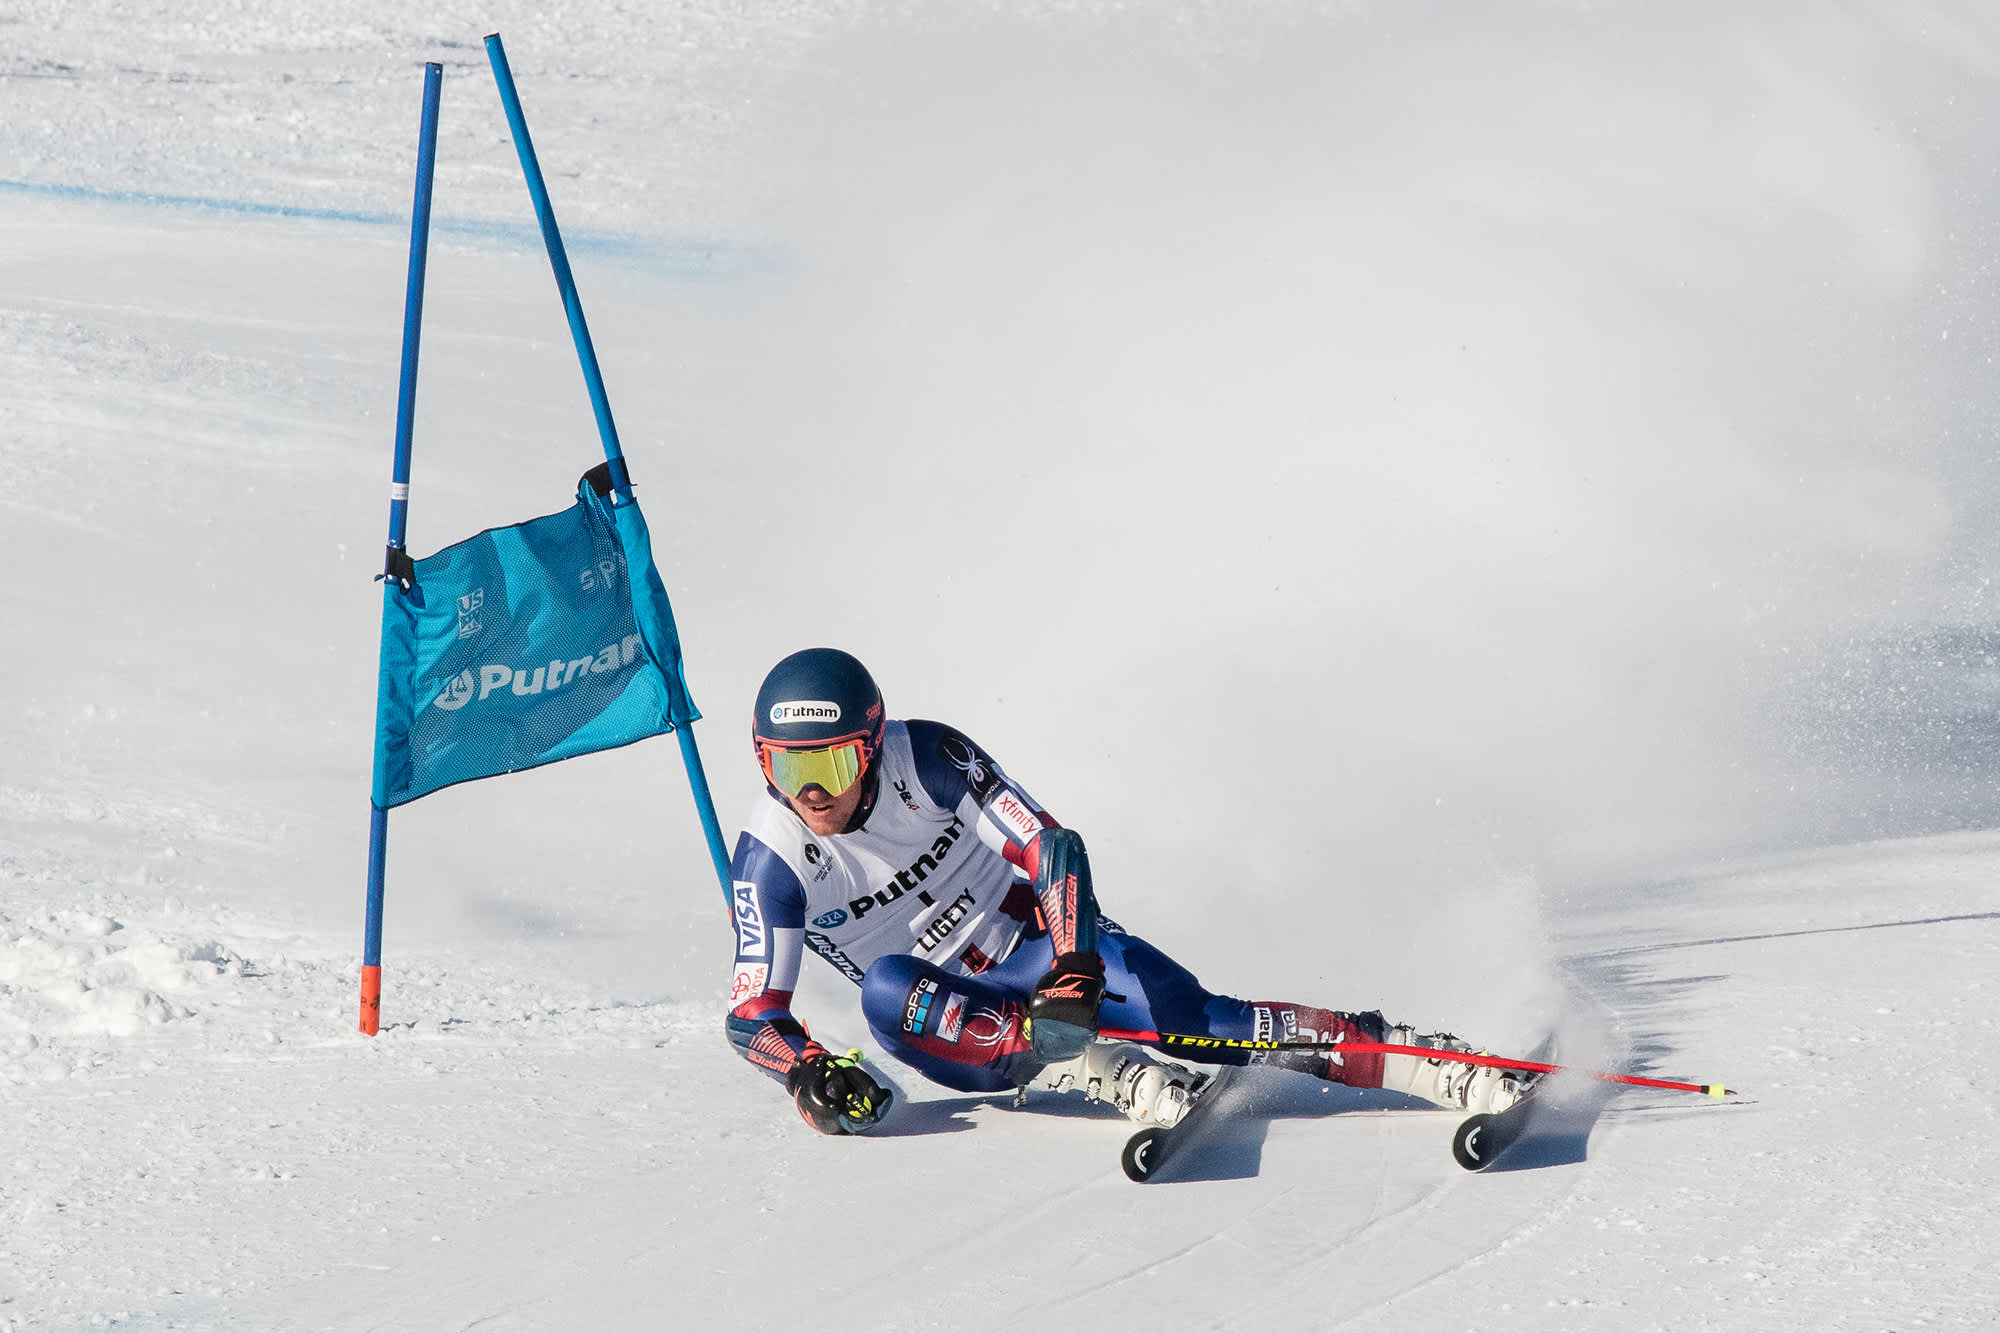 Olympic alpine skier Ted Ligety races for gold on and off the slopes